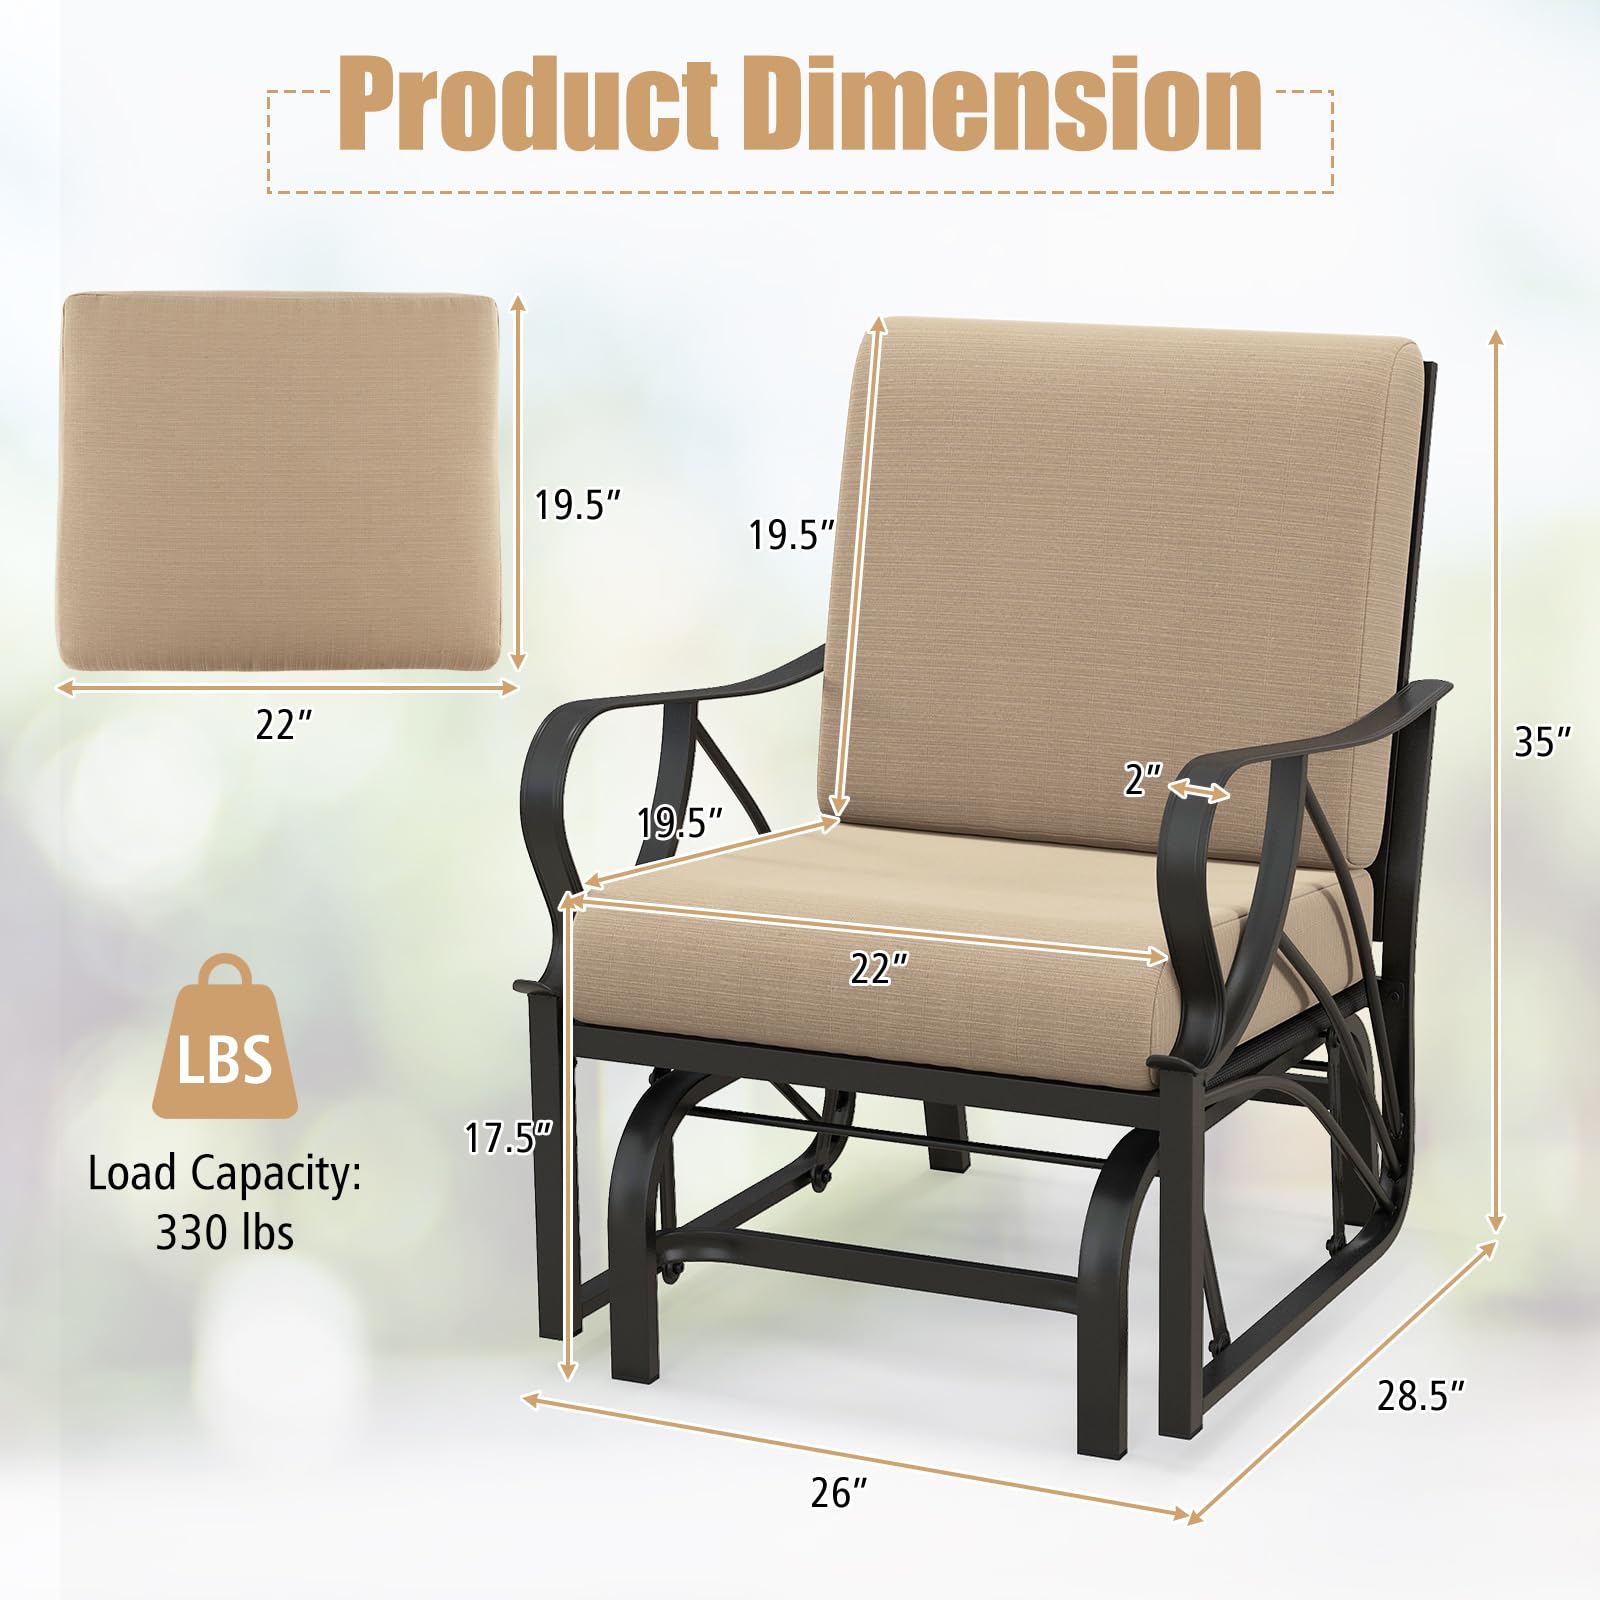 Giantex Patio Glider Outdoor Chair - Outside Rocking Chair with Thick Cushion, Sprayed Metal Frame